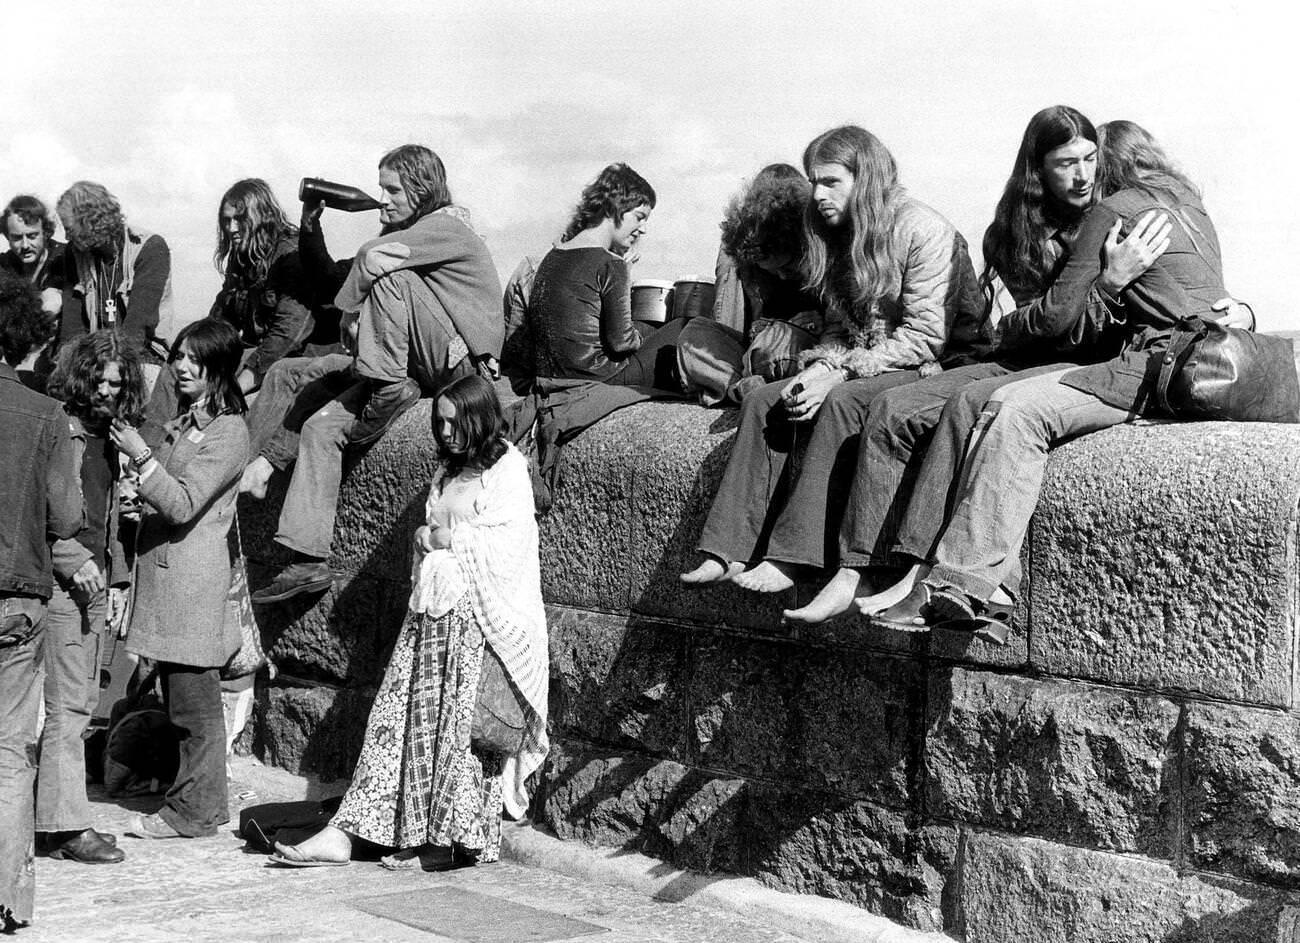 Hippies in St Ives, Cornwall, June 1973.